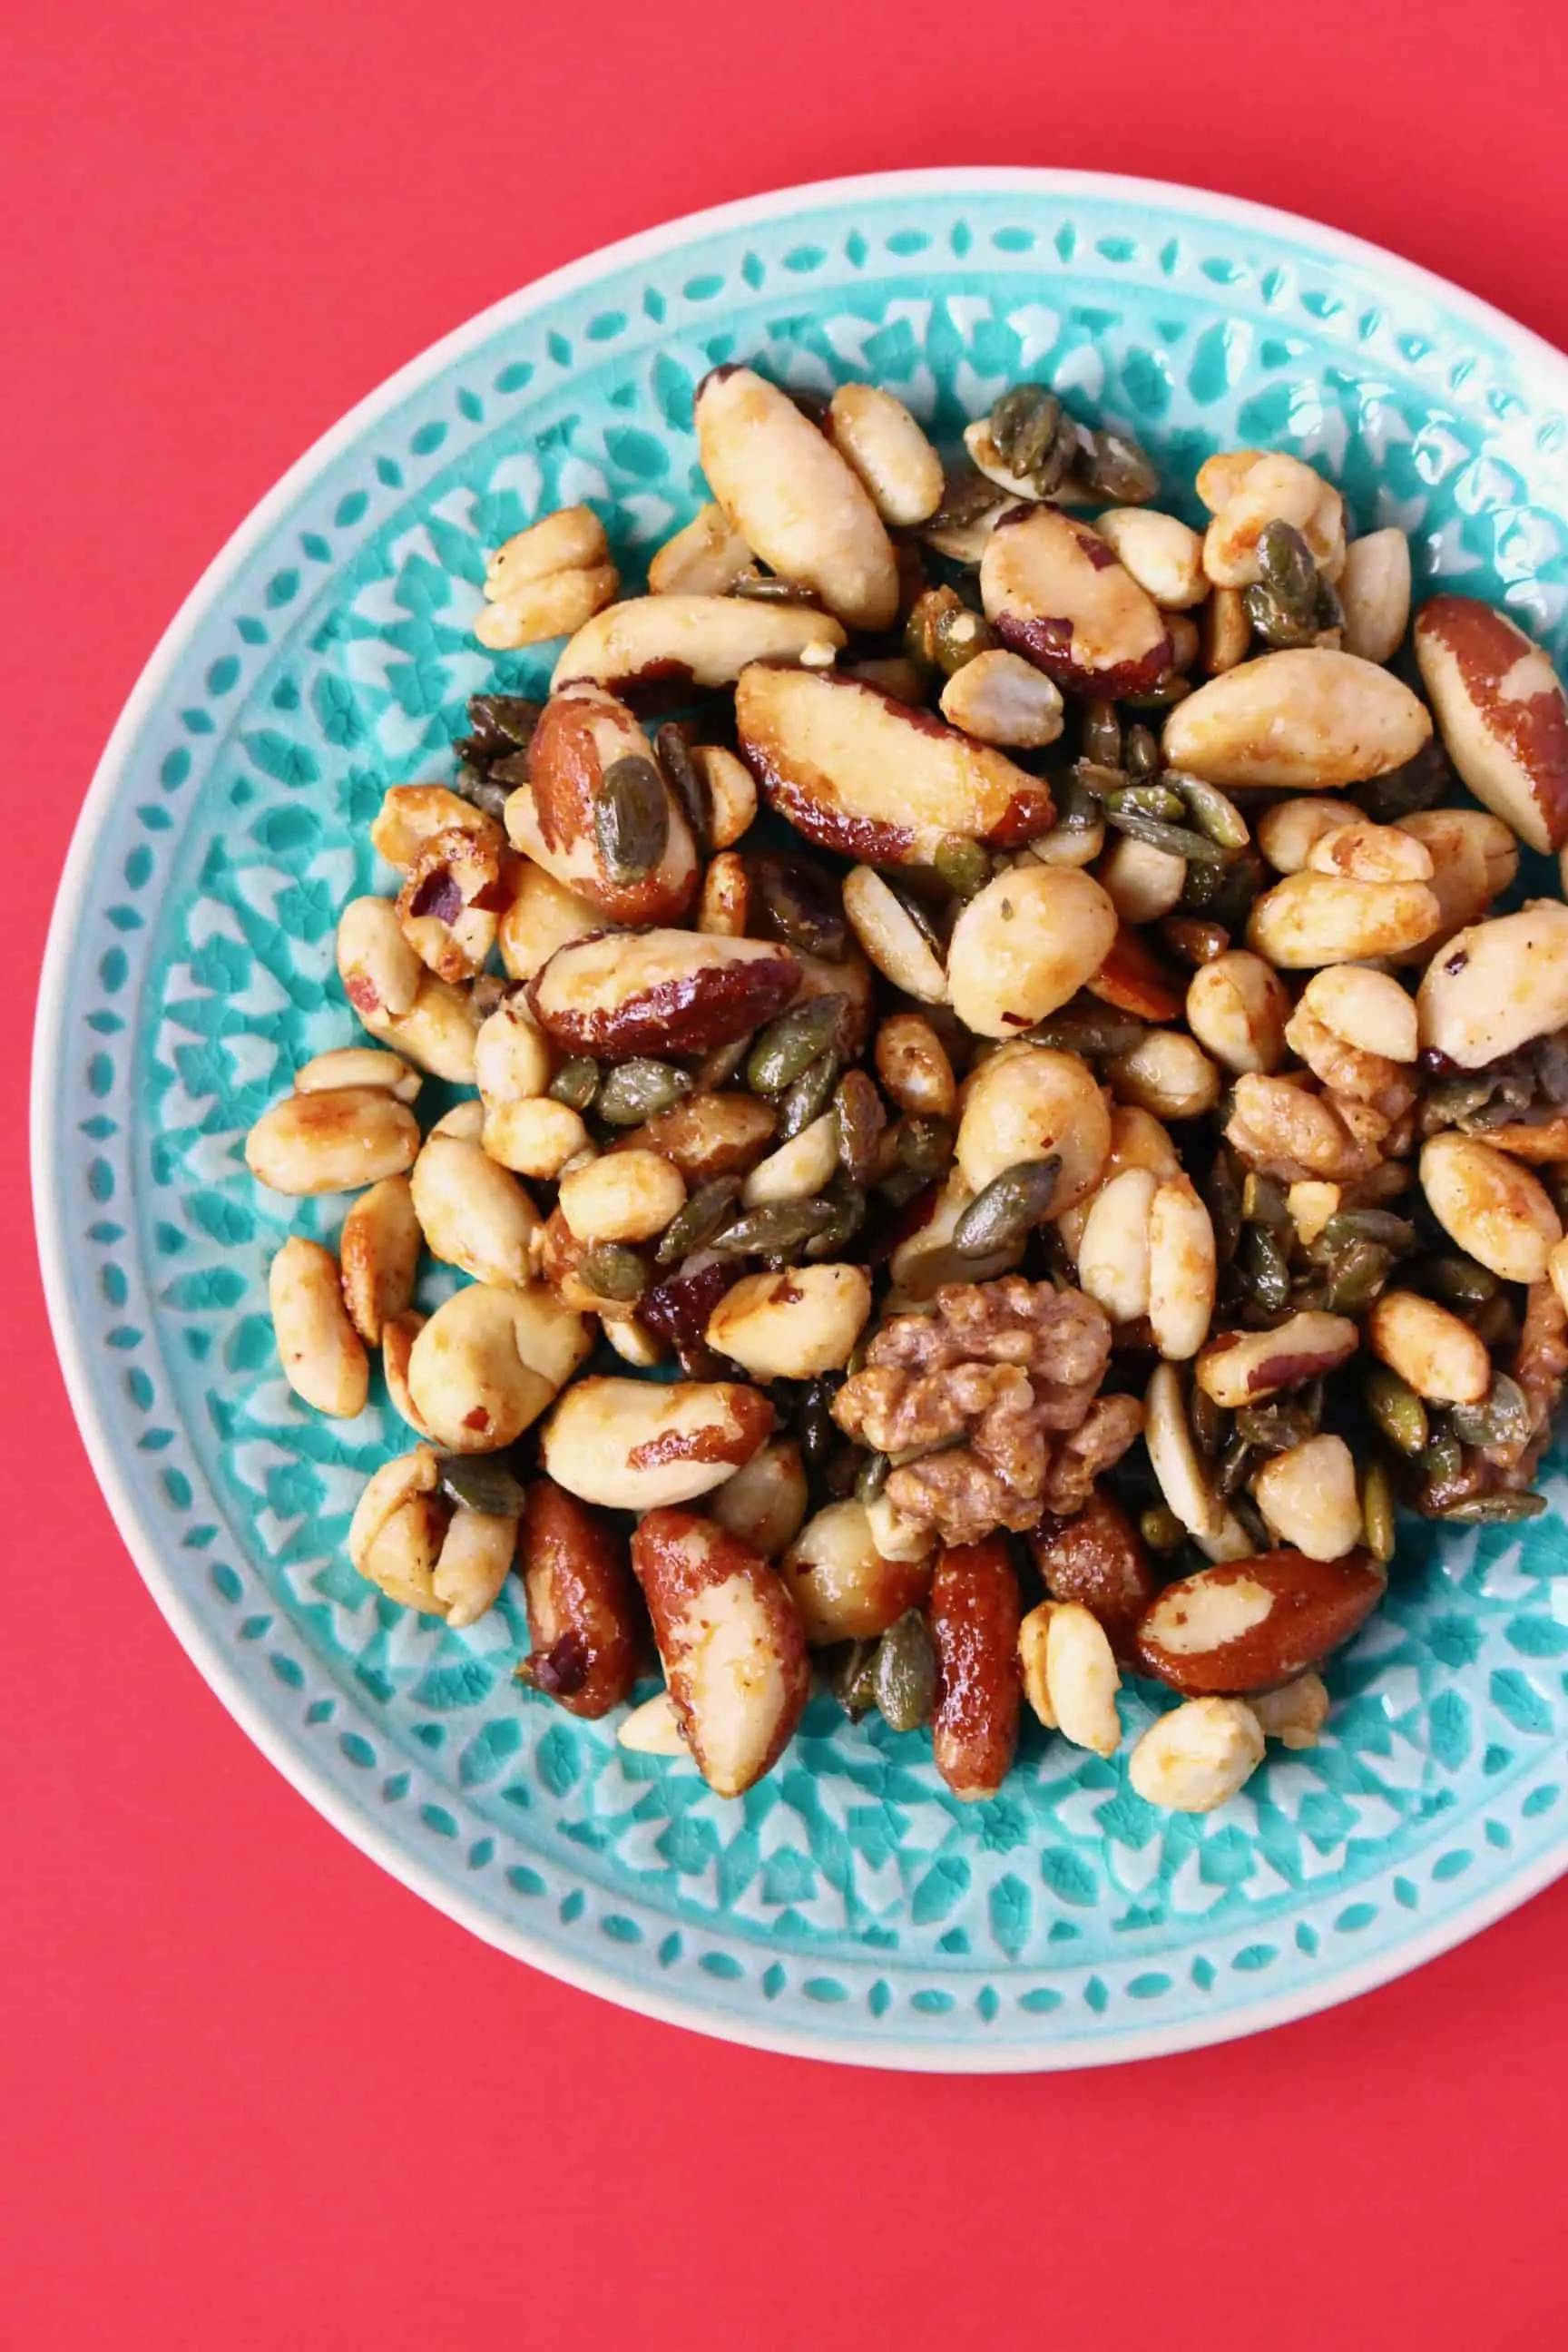 A pile of brown caramelised nuts on a green plate against a red background